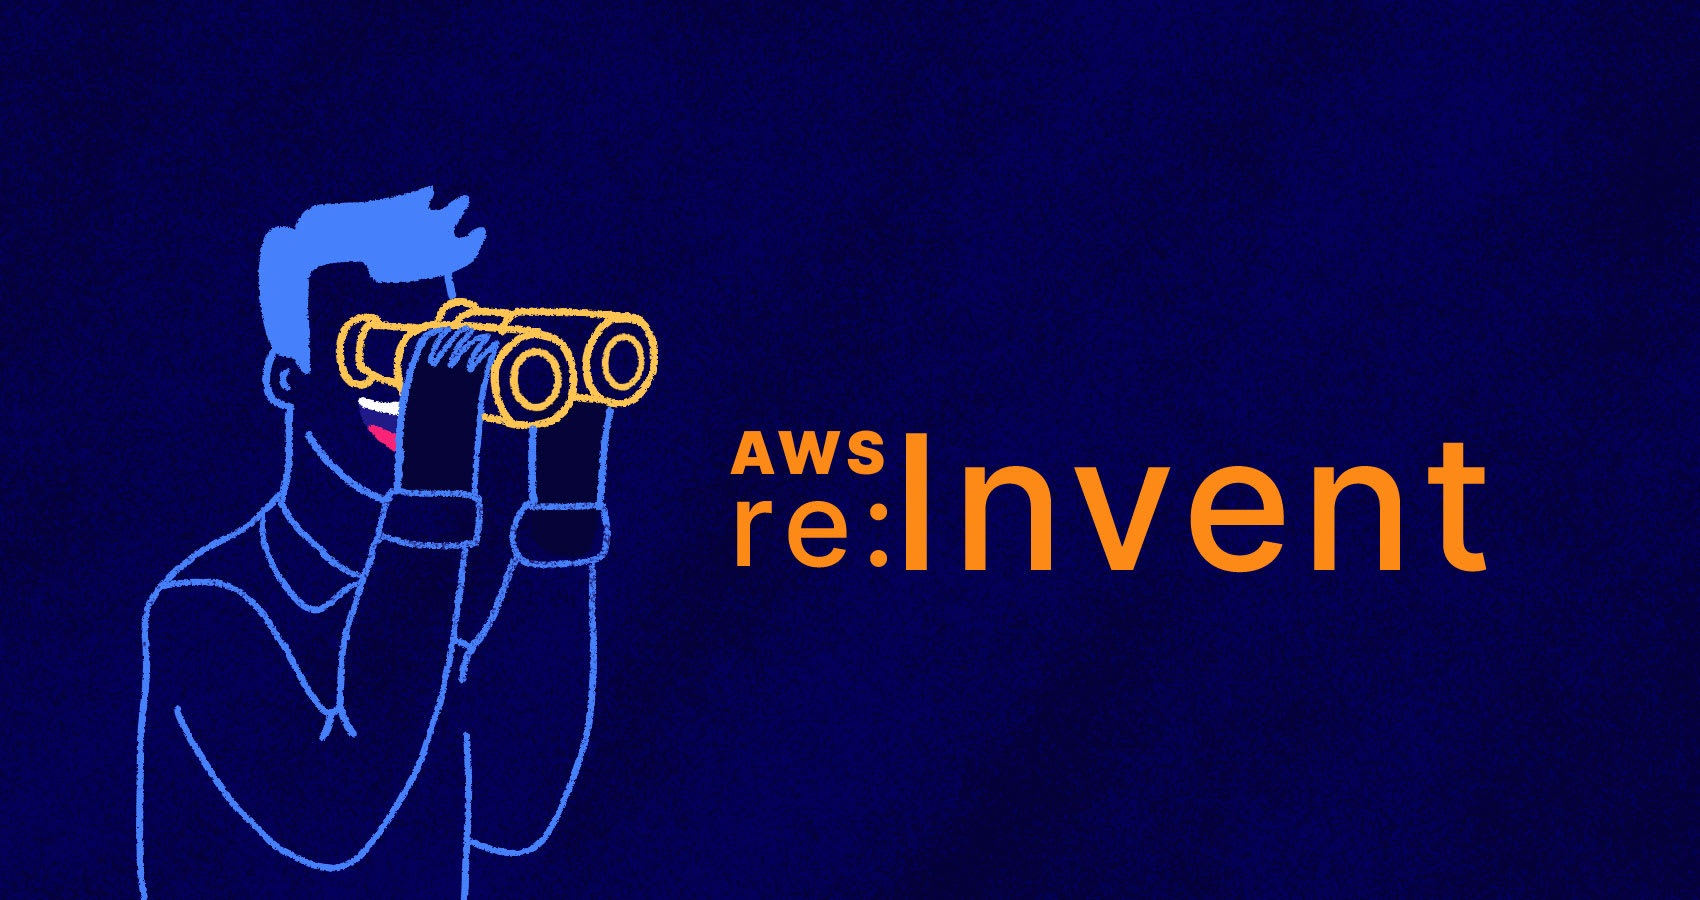 Title 'AWS re:Invent' with a person using binoculars to view it